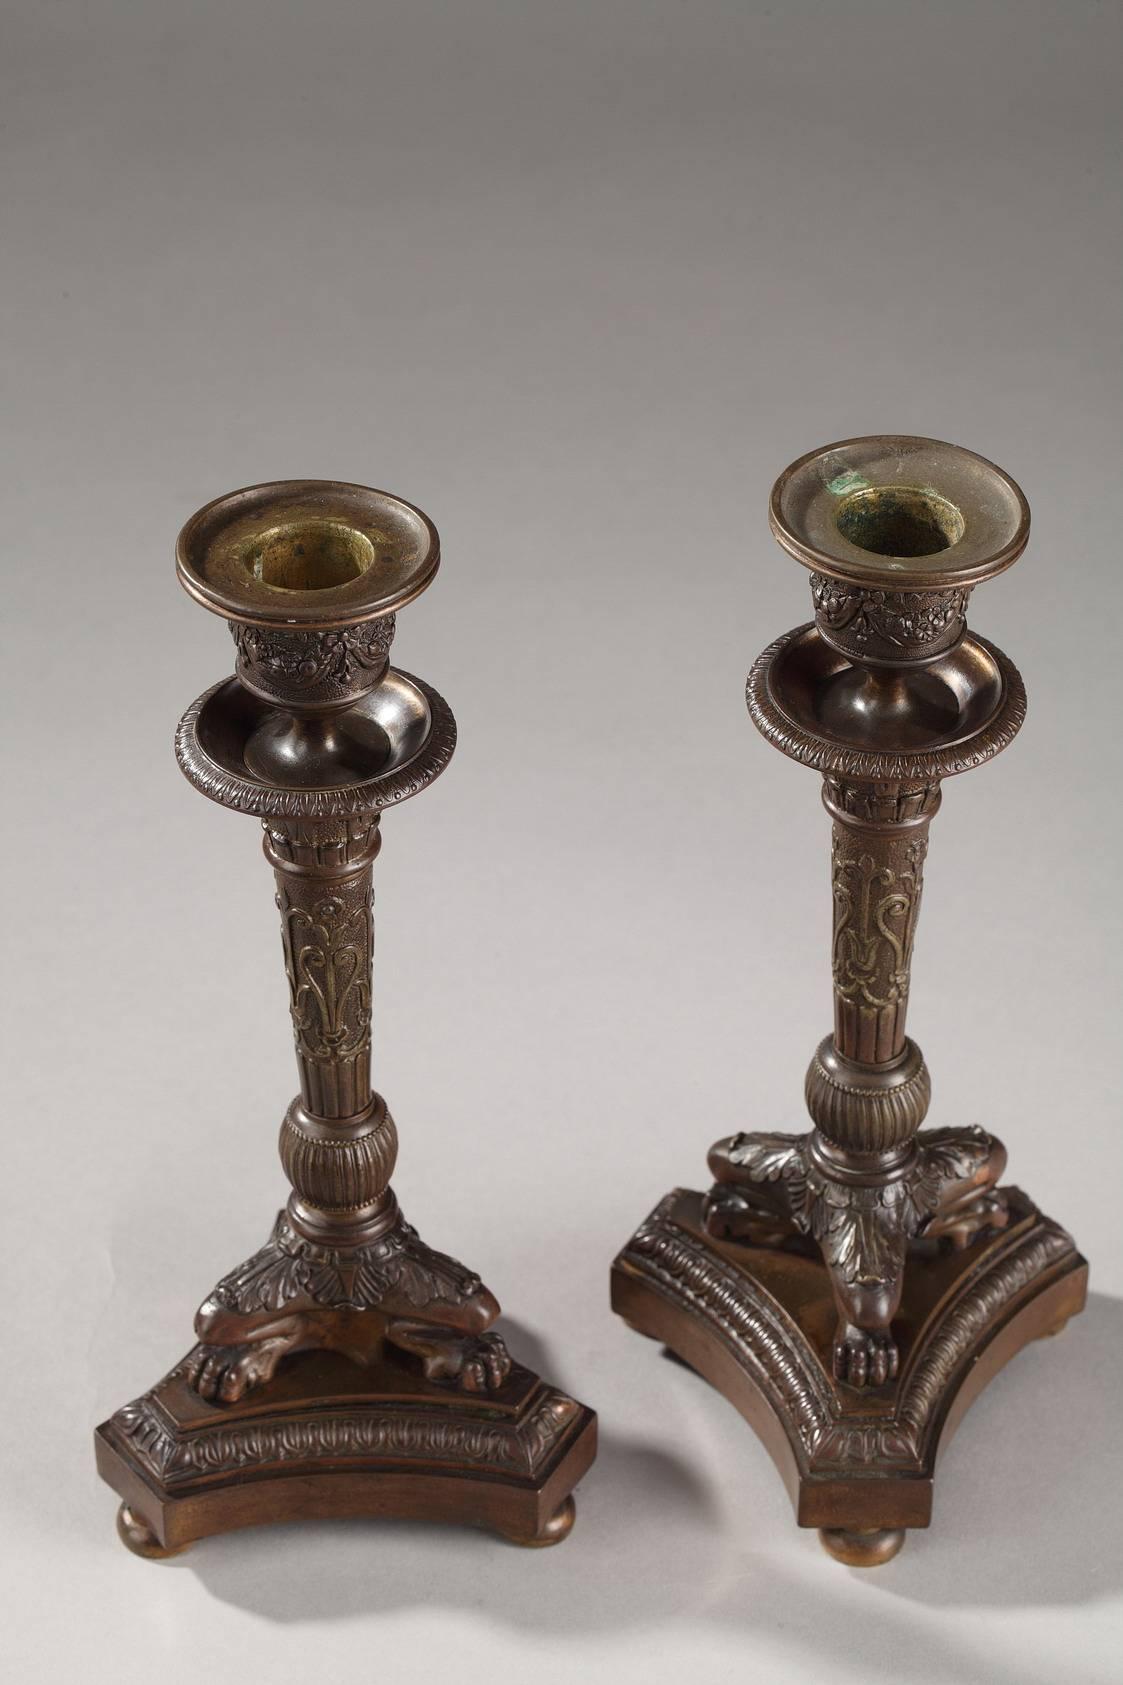 Pair of small, patinated bronze candlesticks resting on three lion's feet that are embellished with palmettes and acanthus leaves. The tripod base is ringed with a raie-de-coeur motif. The tapered shaft is intricately sculpted with branches,